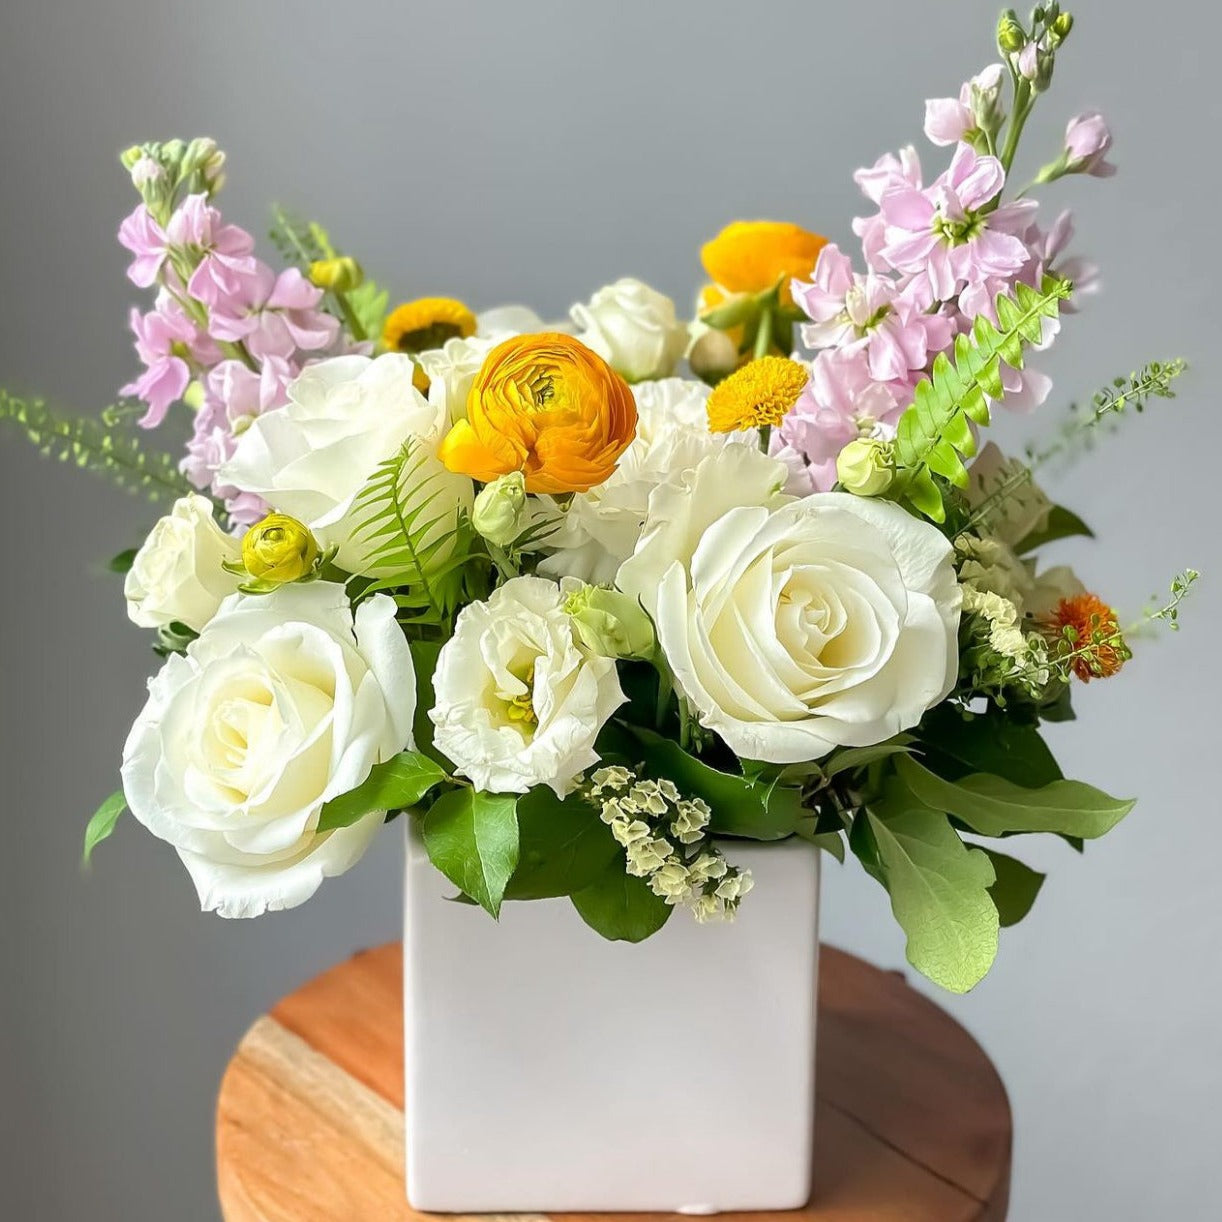 Medium white box with selected fresh cut flowers.